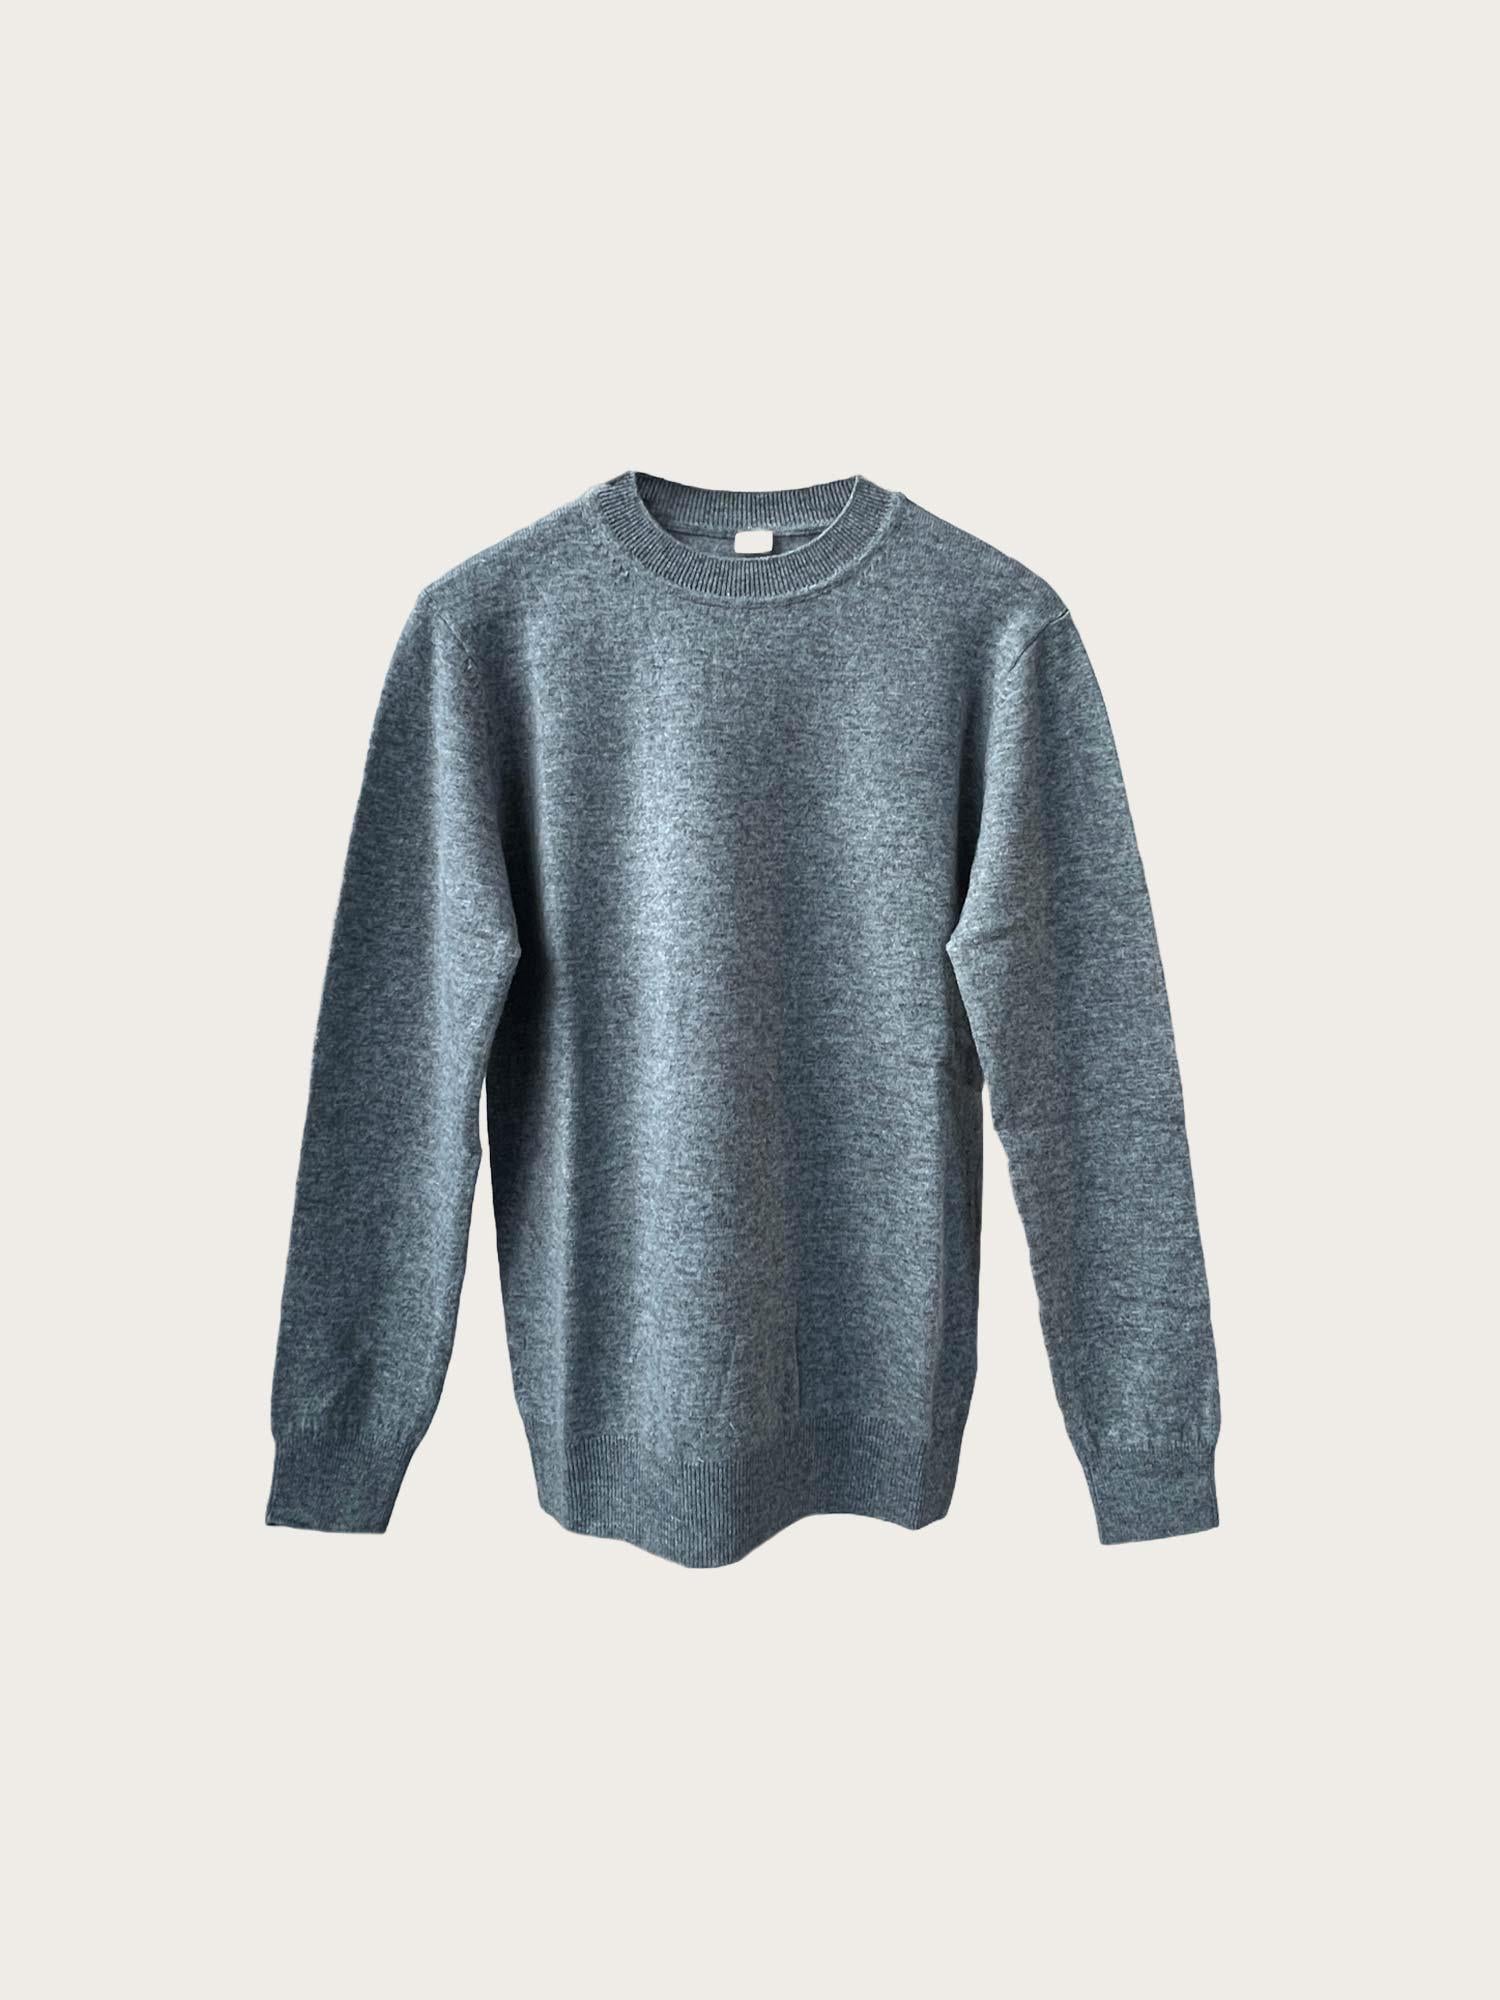 Knitted Crewneck Sweater - Vintage Grey